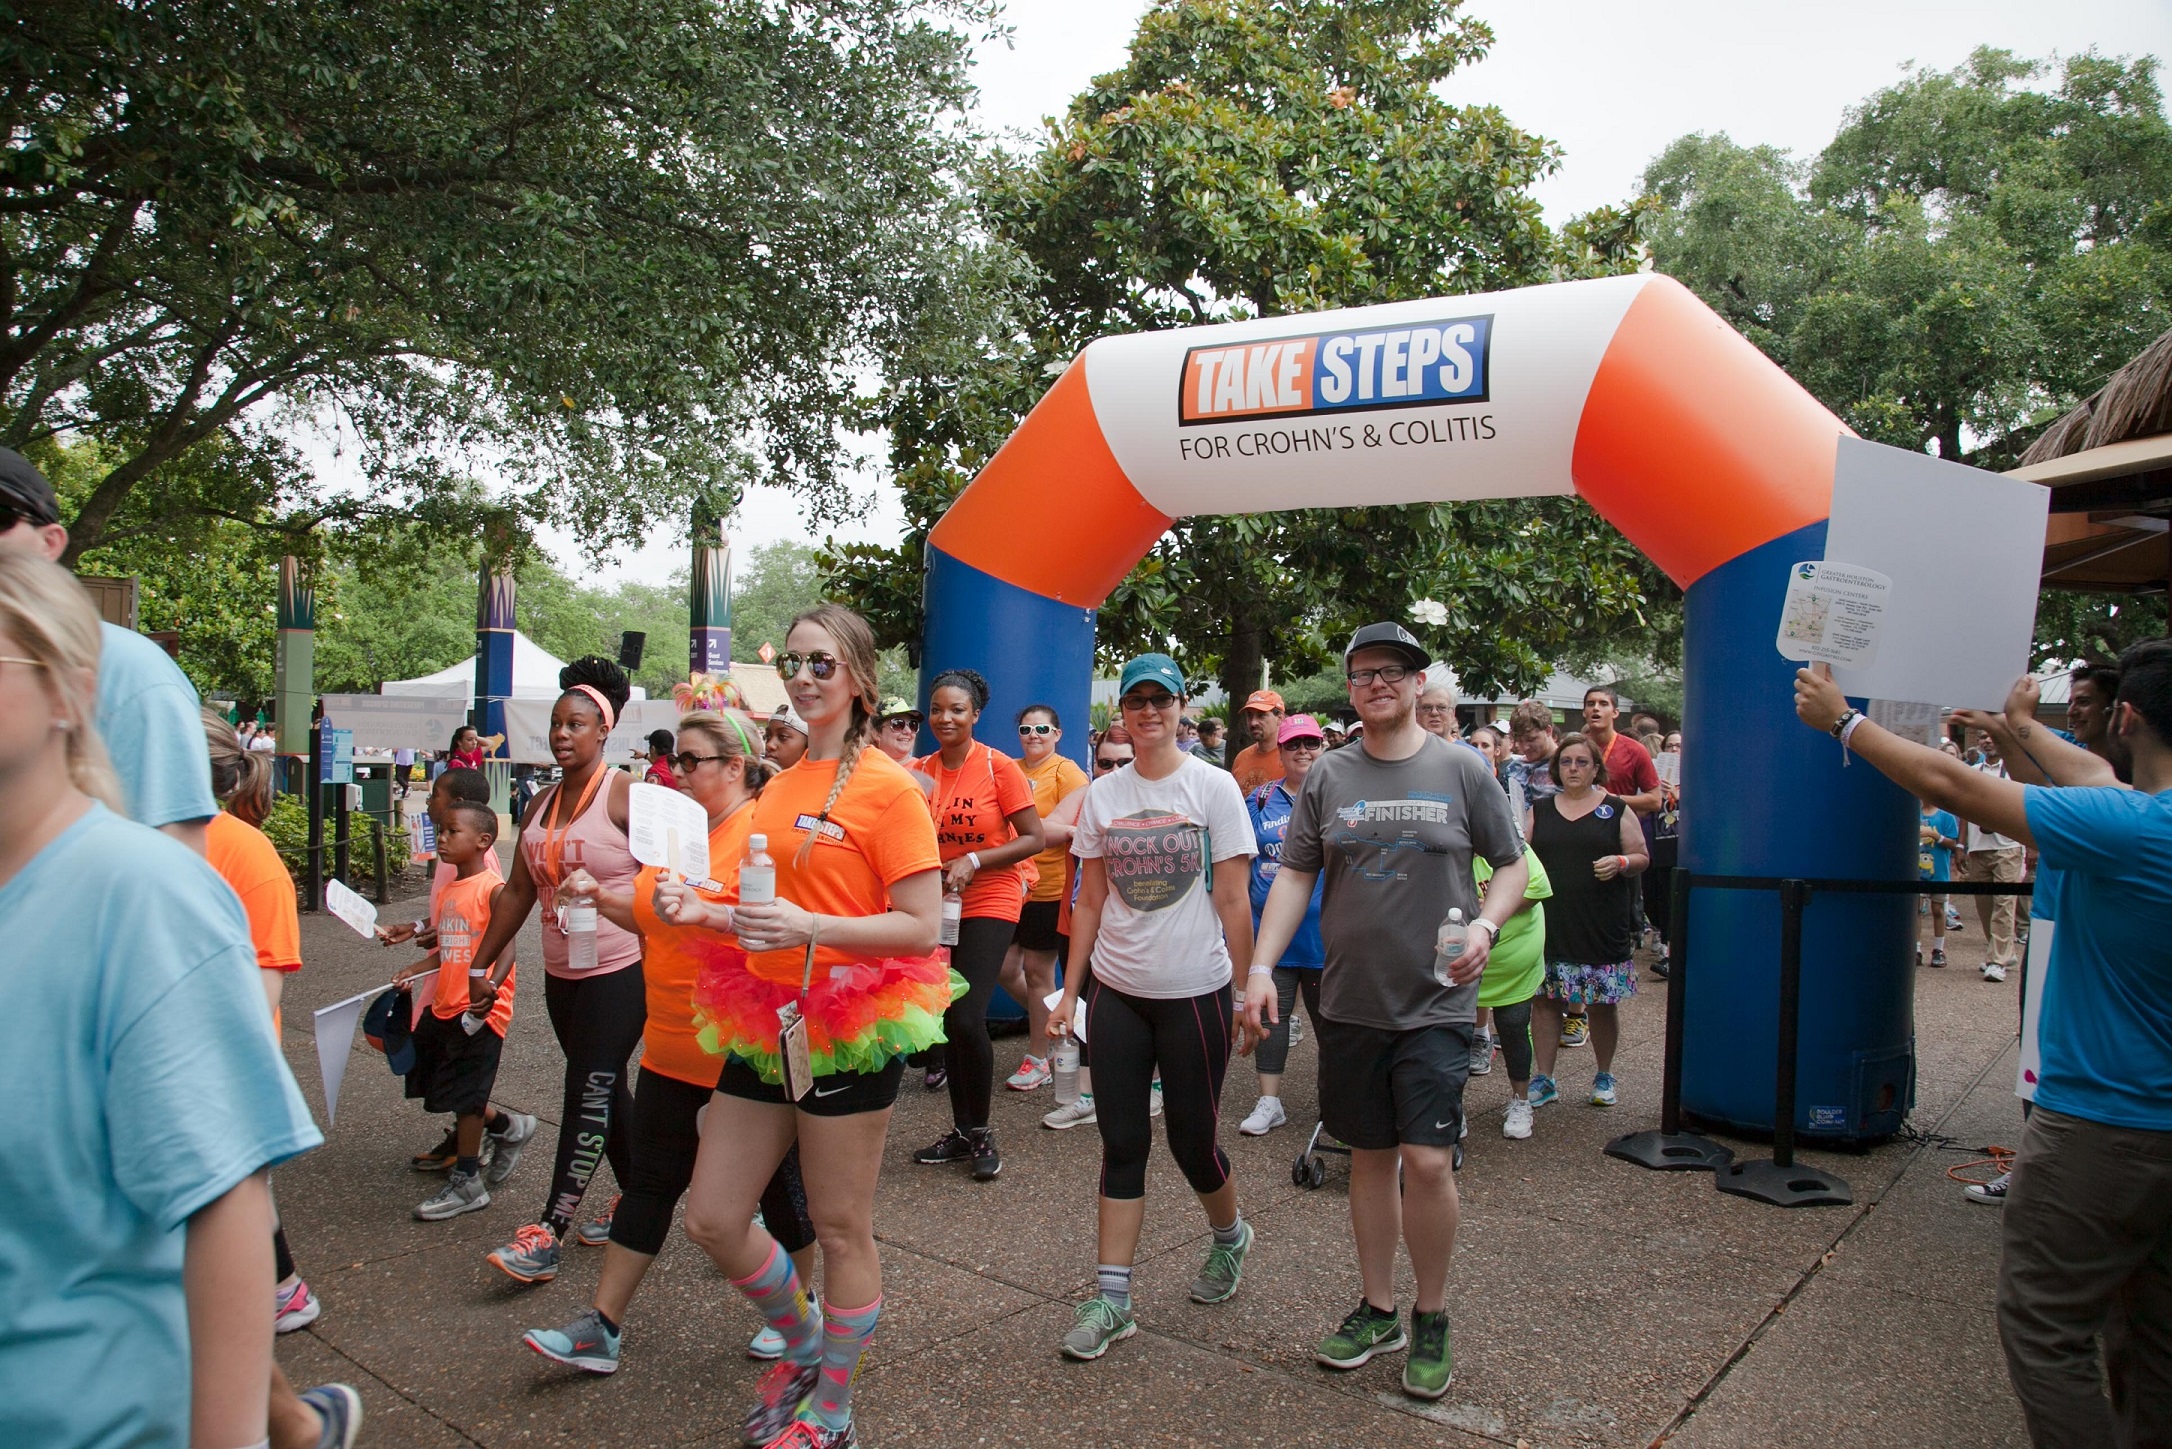 Join the UAB Surgery team at the Birmingham Take Steps for Crohn’s & Colitis walk on April 28 .